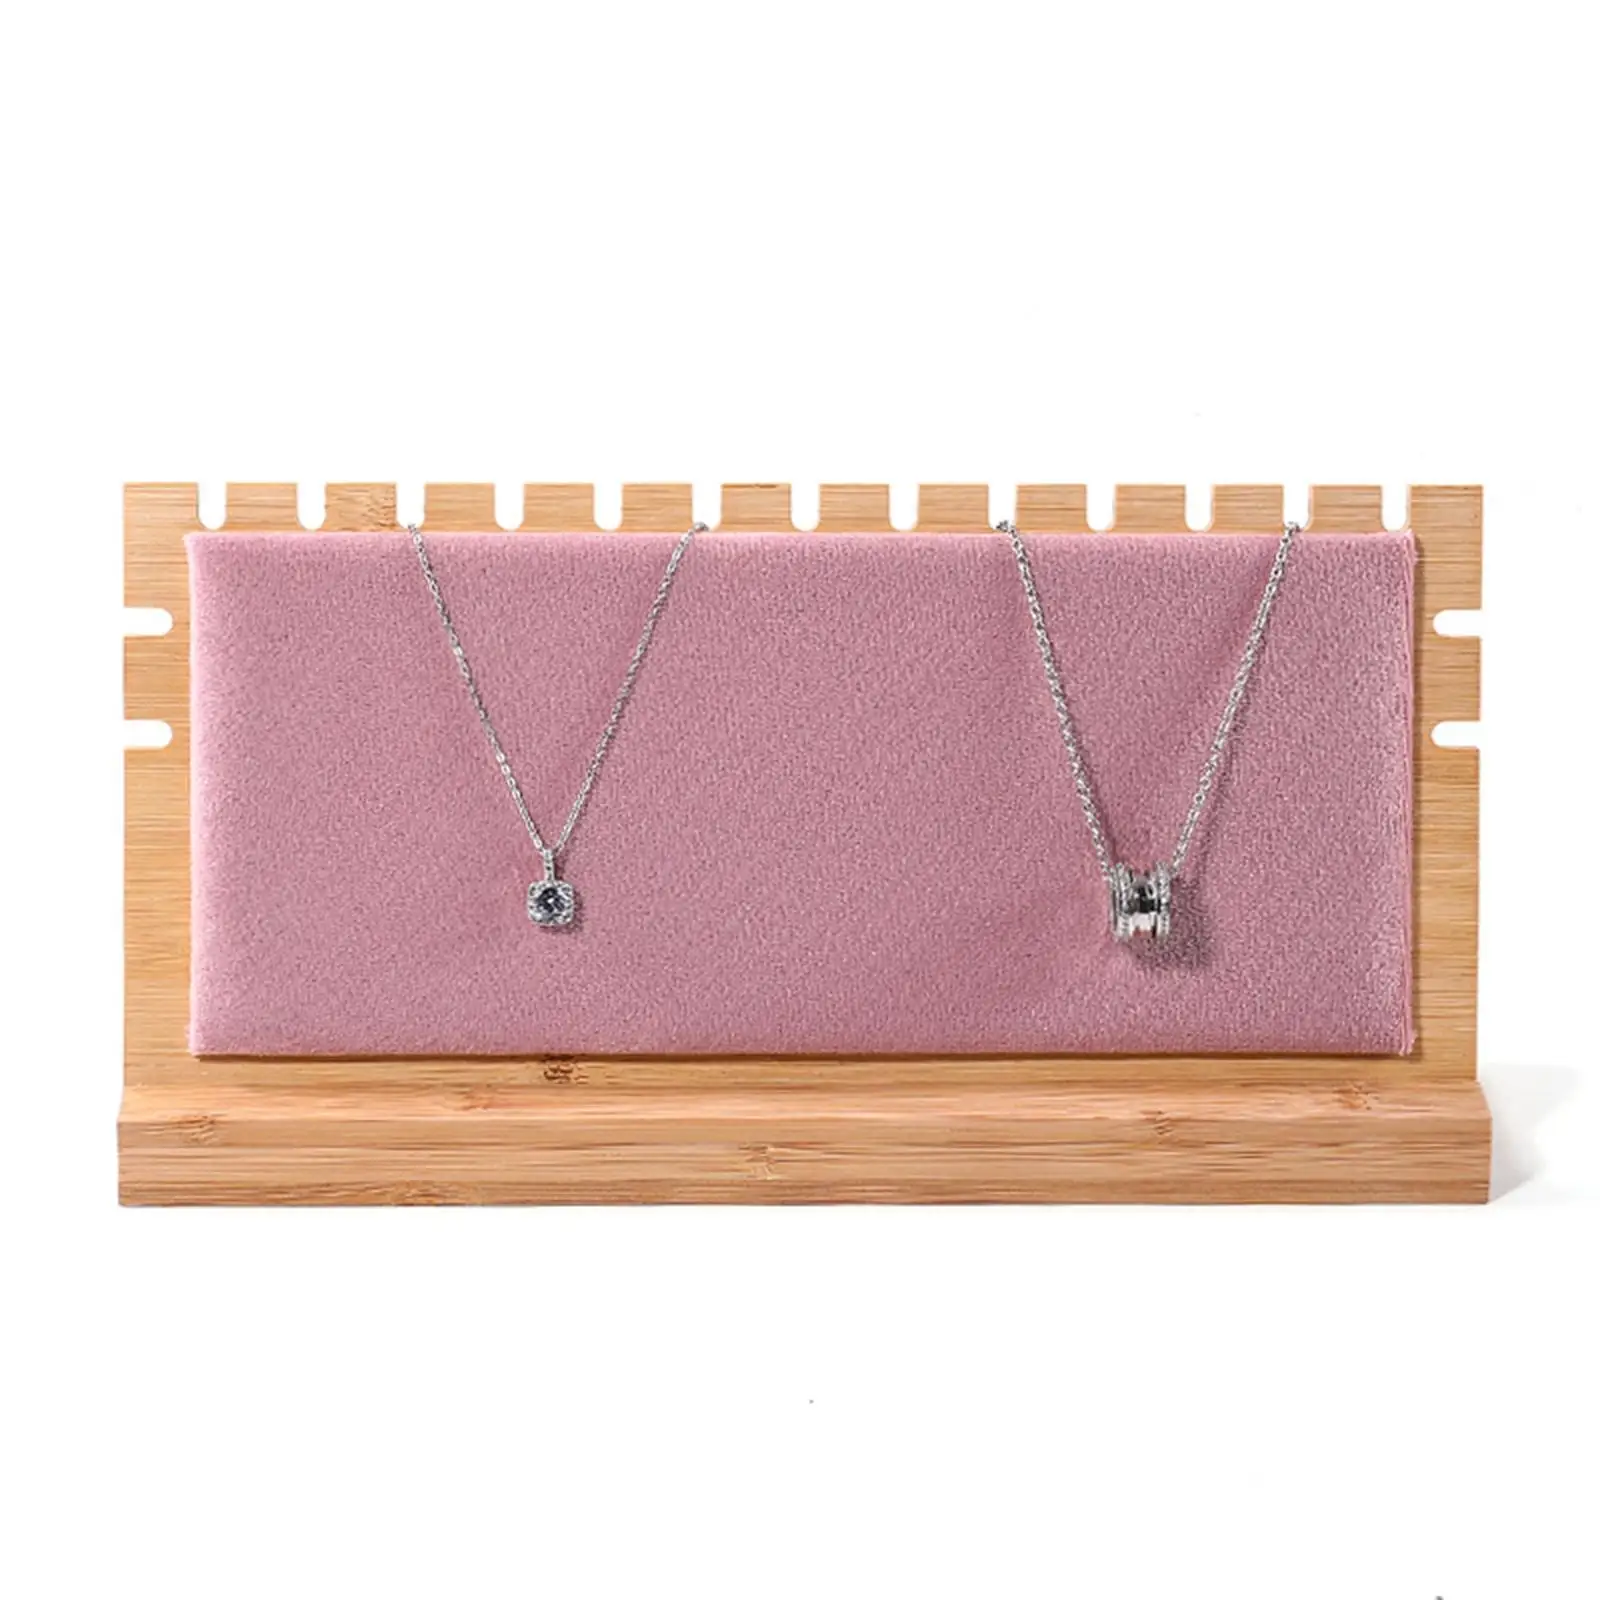 Necklace Display Board Jewelry Organizer Portable Rack, Chains, Wood Jewelry Display Stand Necklace Holder for Display Case